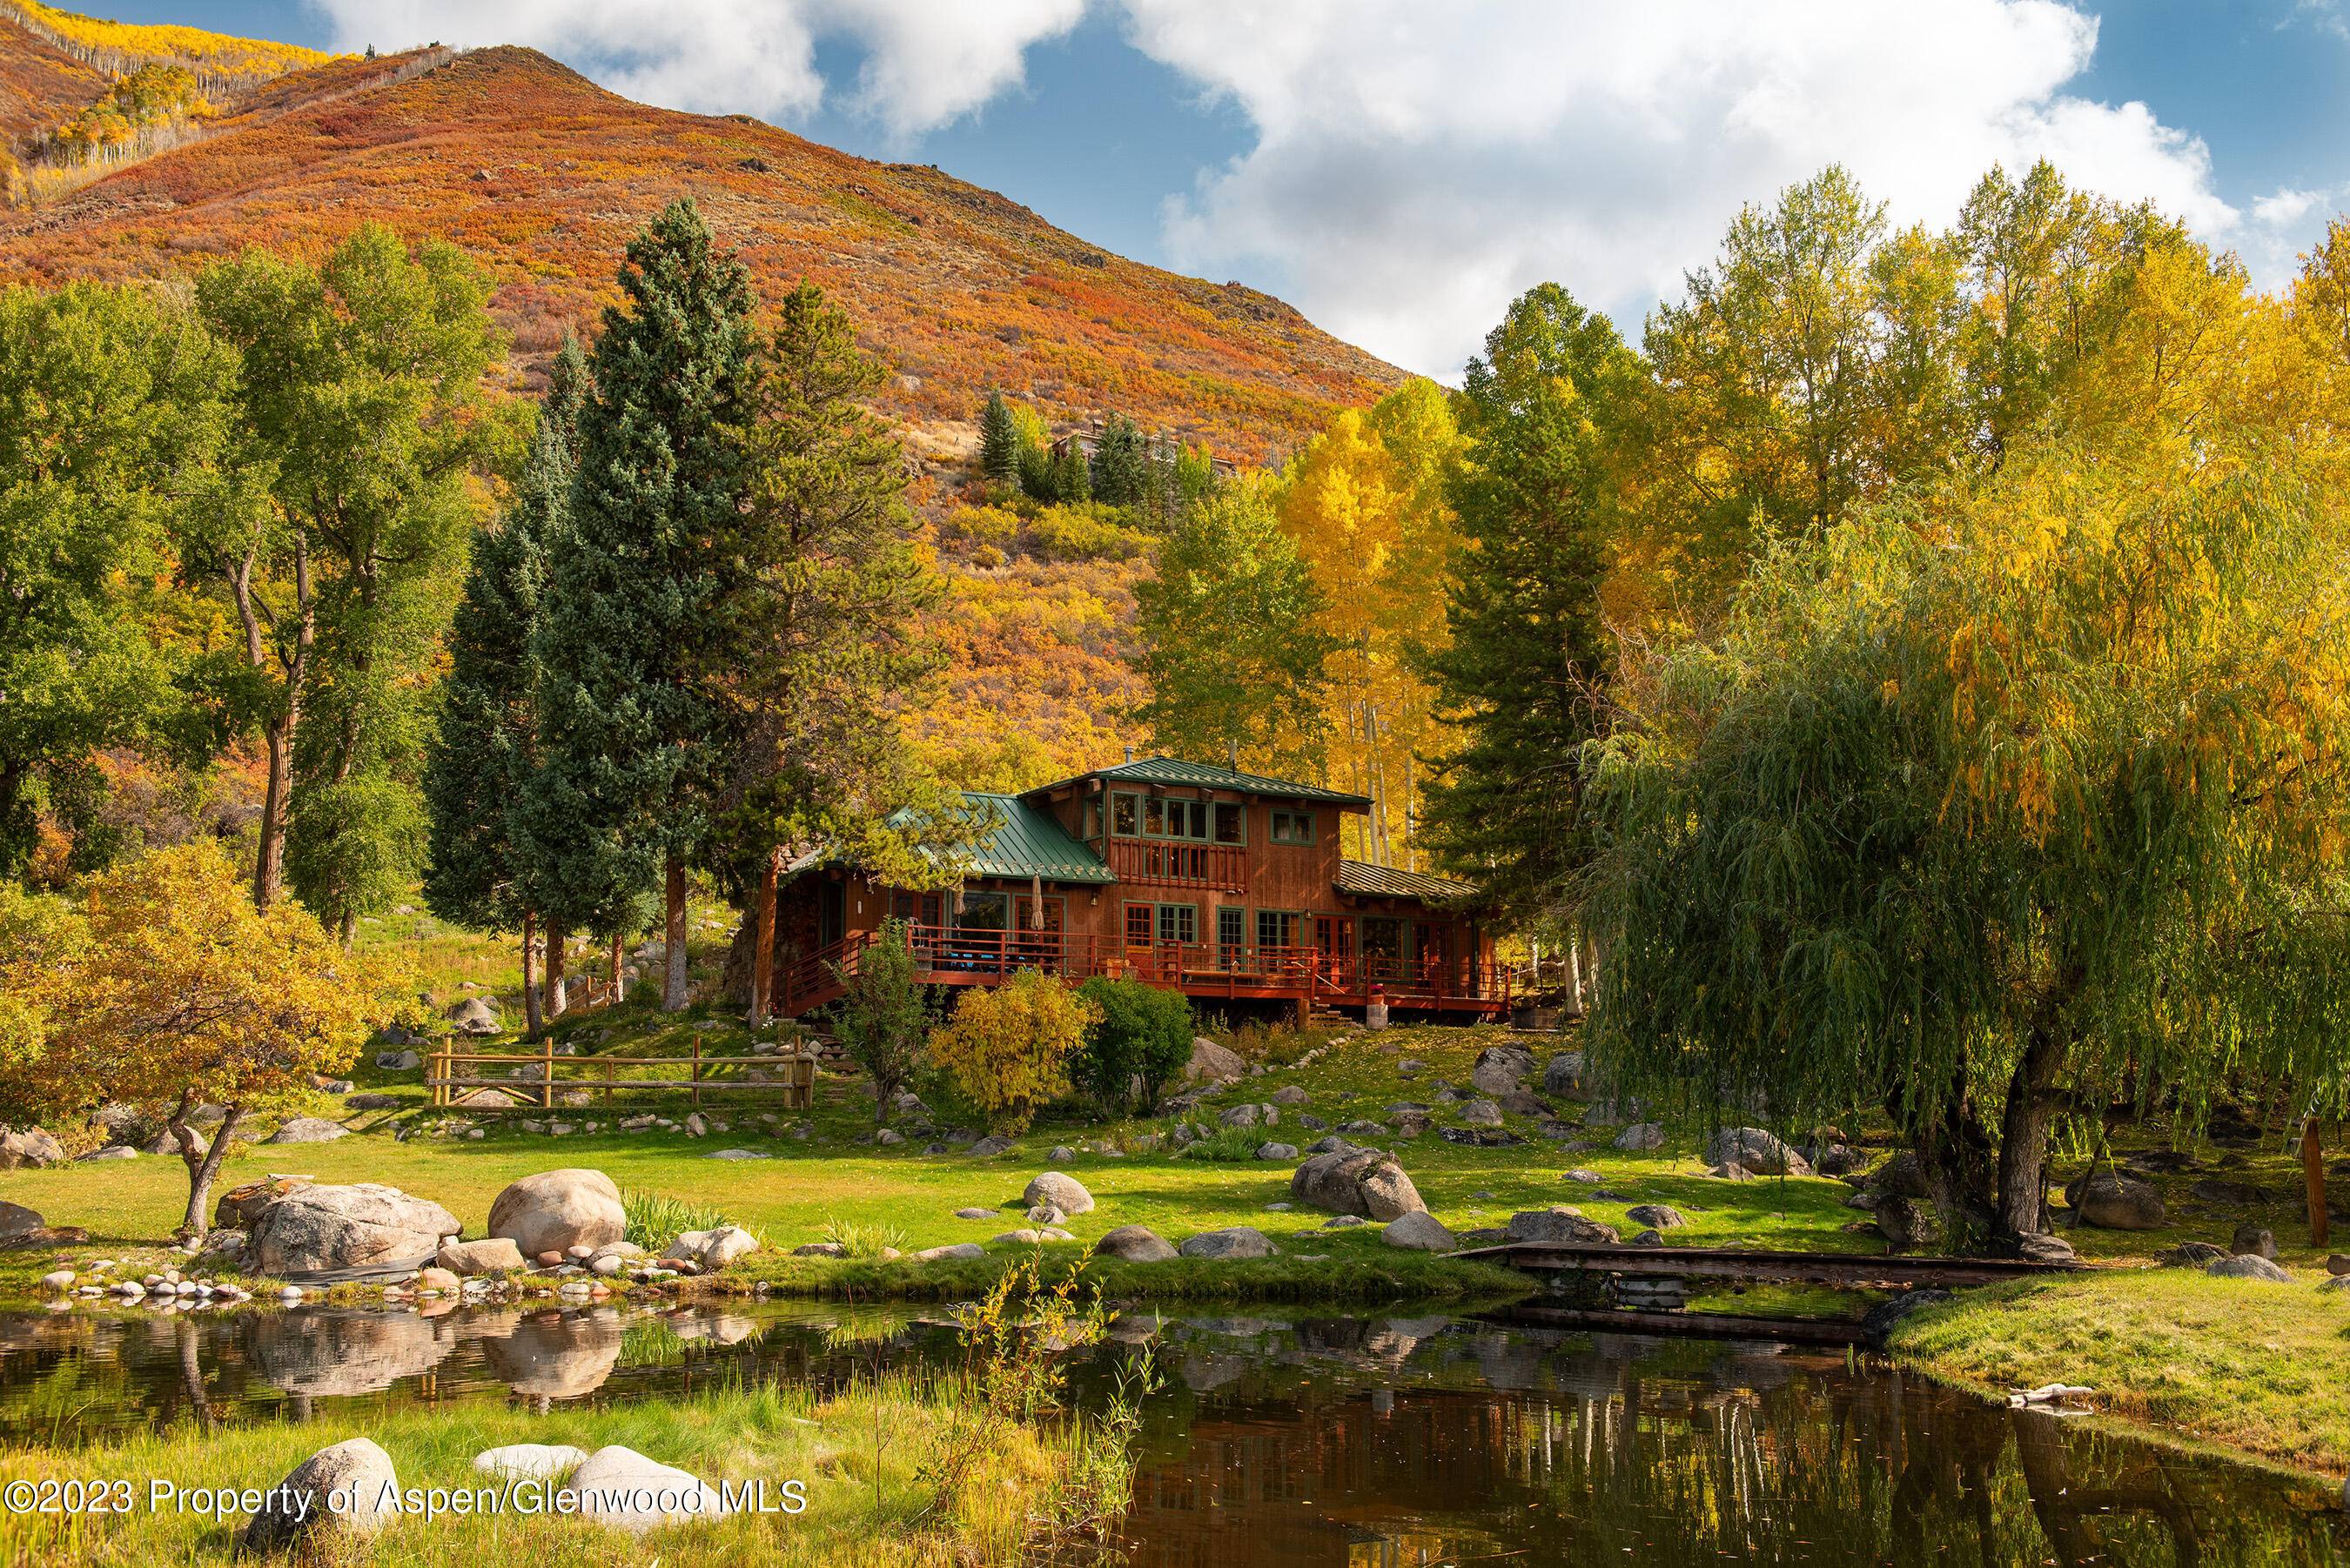 ASPEN'S LAST GREAT PROPERTY Welcome to 0209 E Red's Road, the most exceptional property in Aspen.